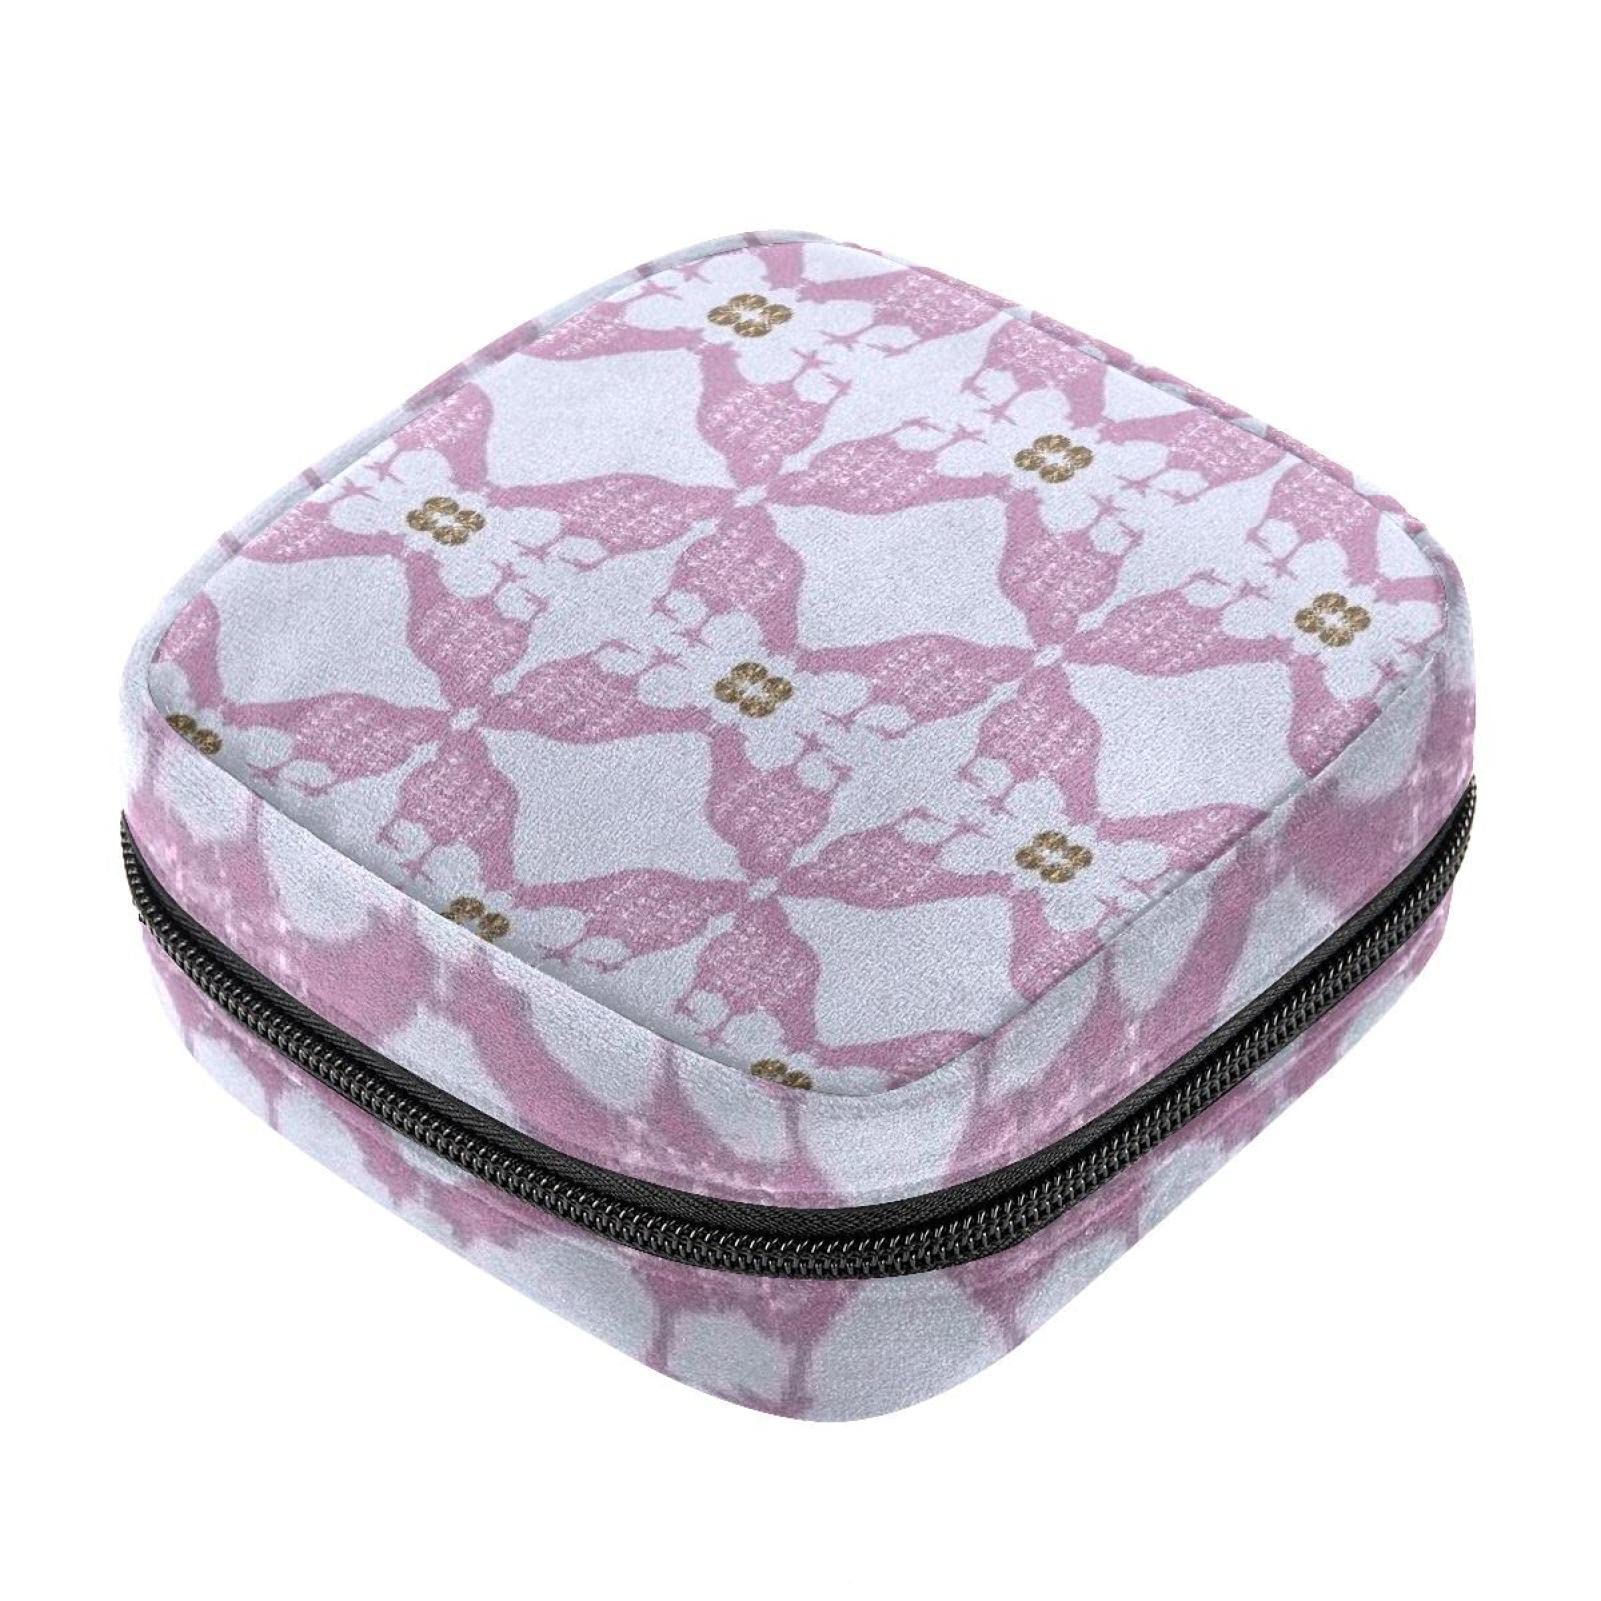 Multi Functional Womens Cute Small Makeup Bags With Tampon Holder, Coin  Purse, And Sanitary Pad Pouch For Makeup Storage From Cleanfoot_elitestore,  $1.48 | DHgate.Com